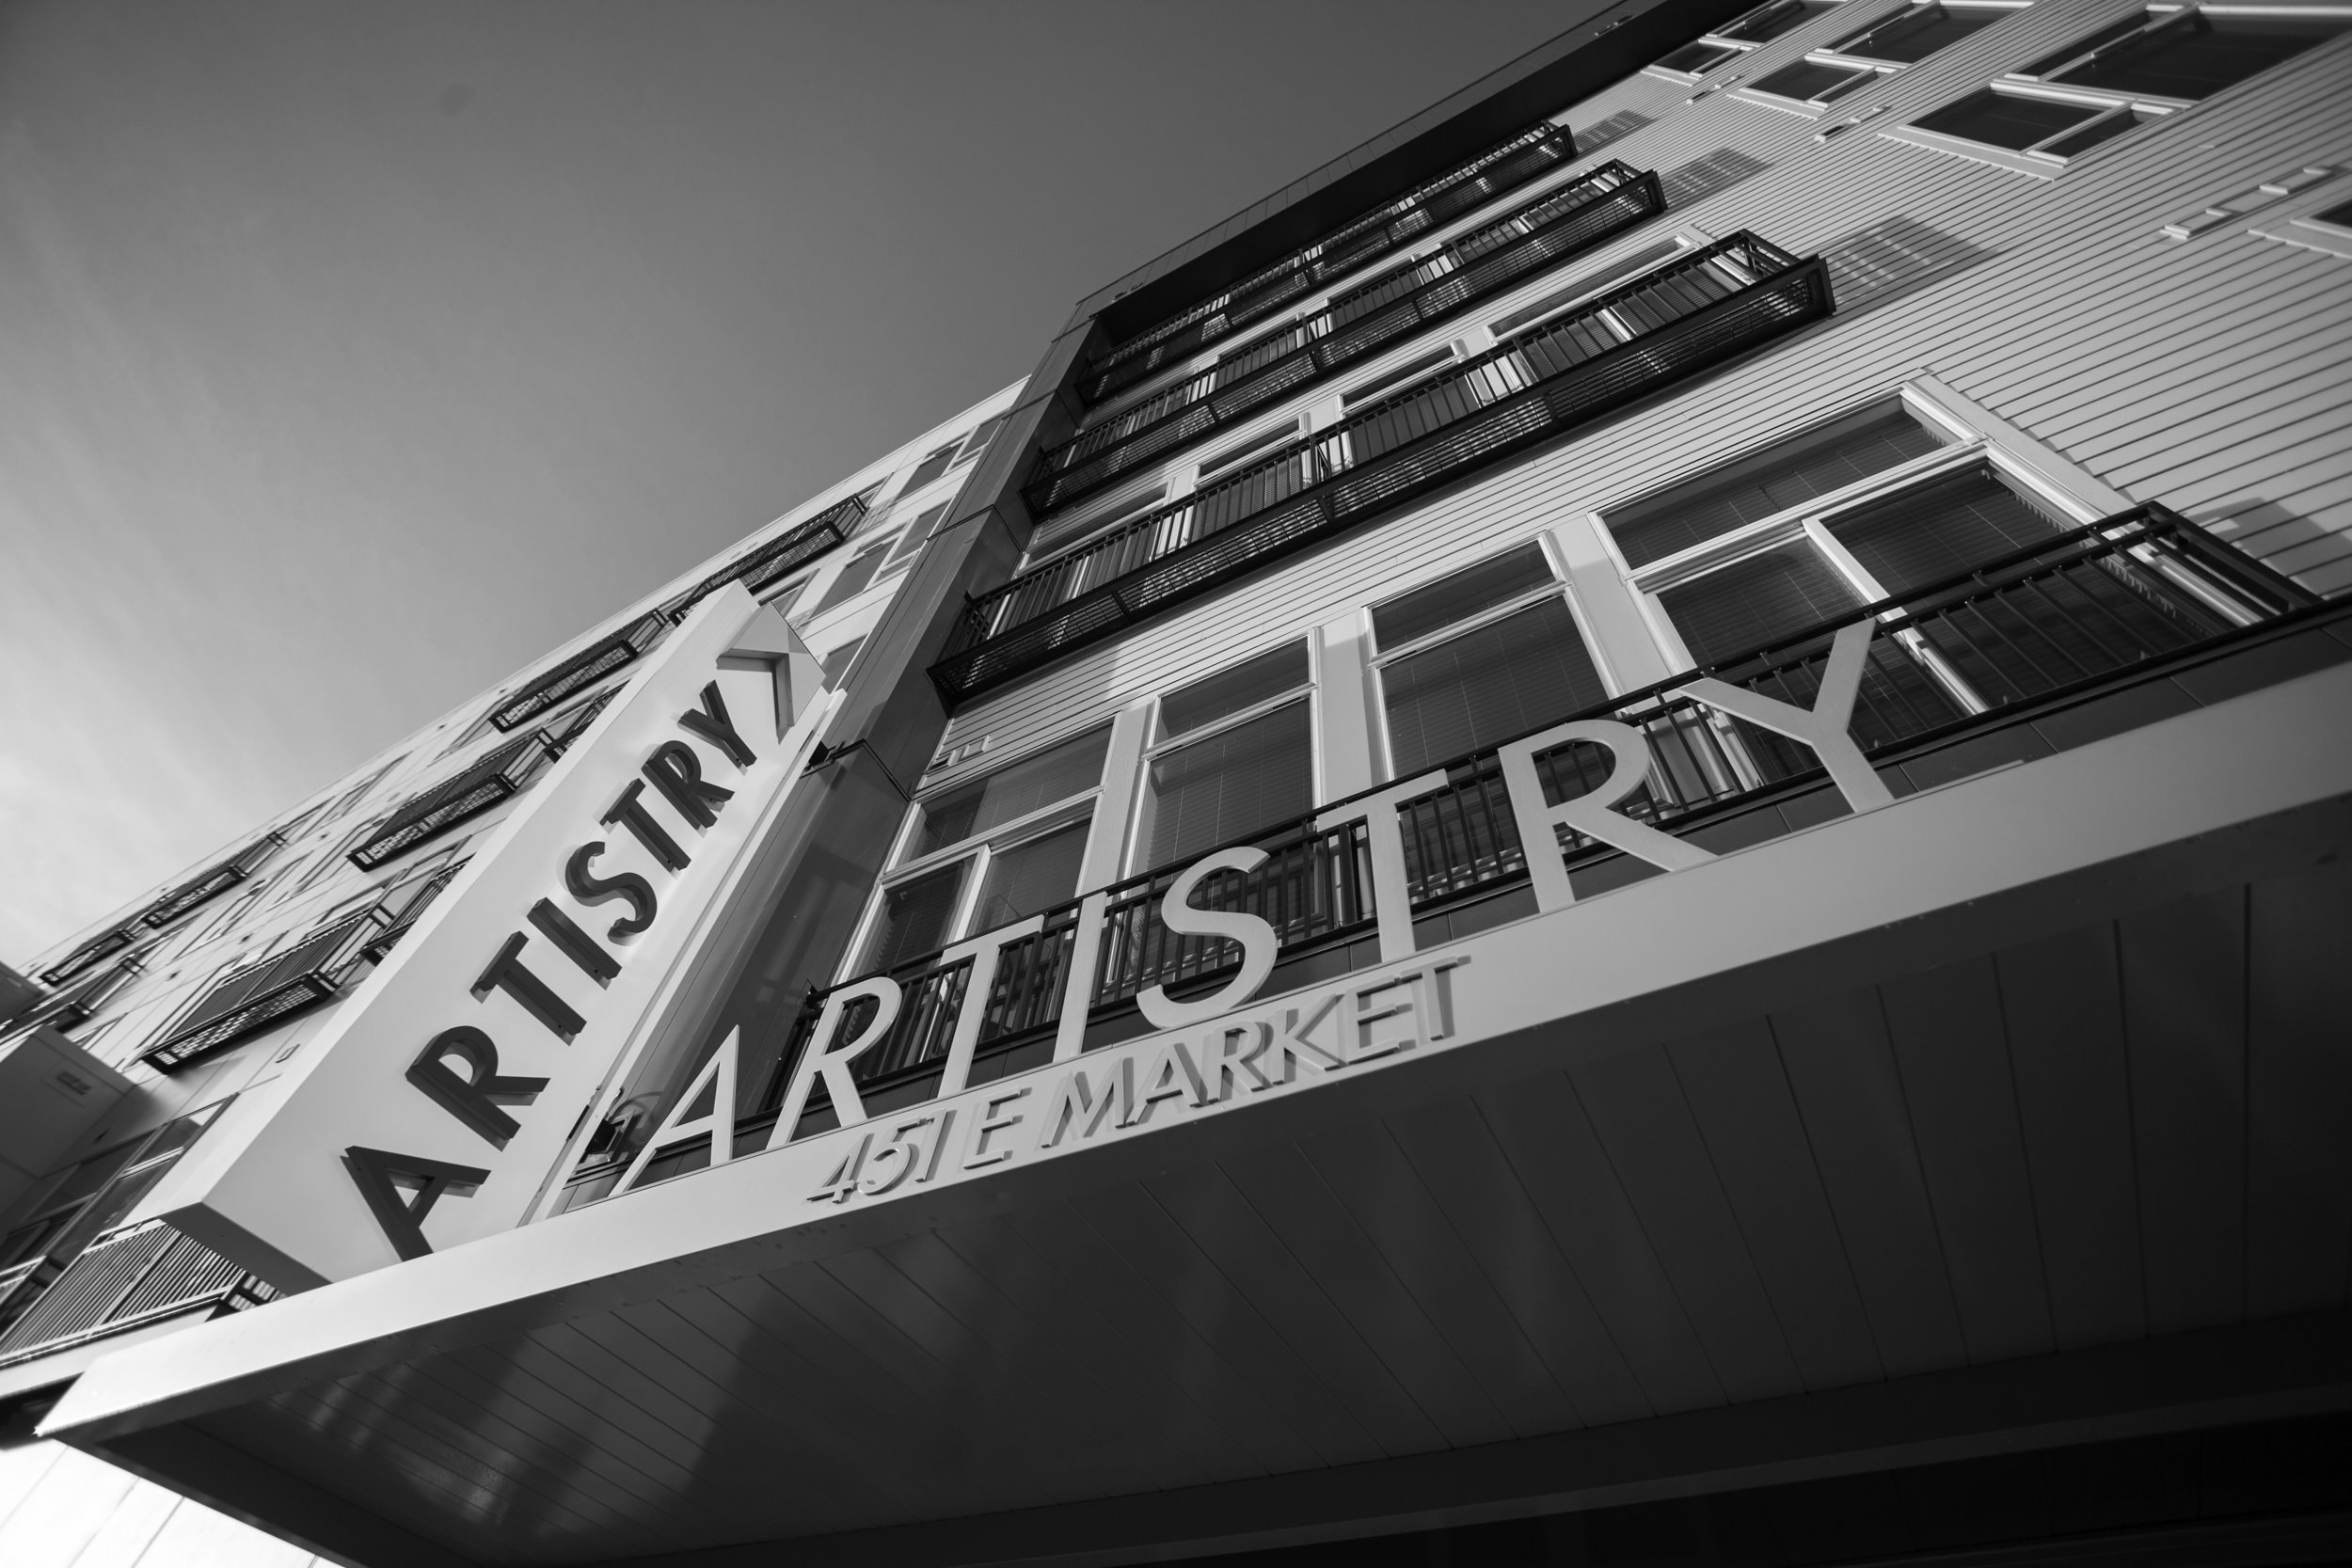   ARTISTRY APARTMENTS   Q7 conceptualized and created the Artistry brand that has now expanded nationally to other cities in the United States.&nbsp; The residents experience local artists in an urban style space that features a permanent collection 